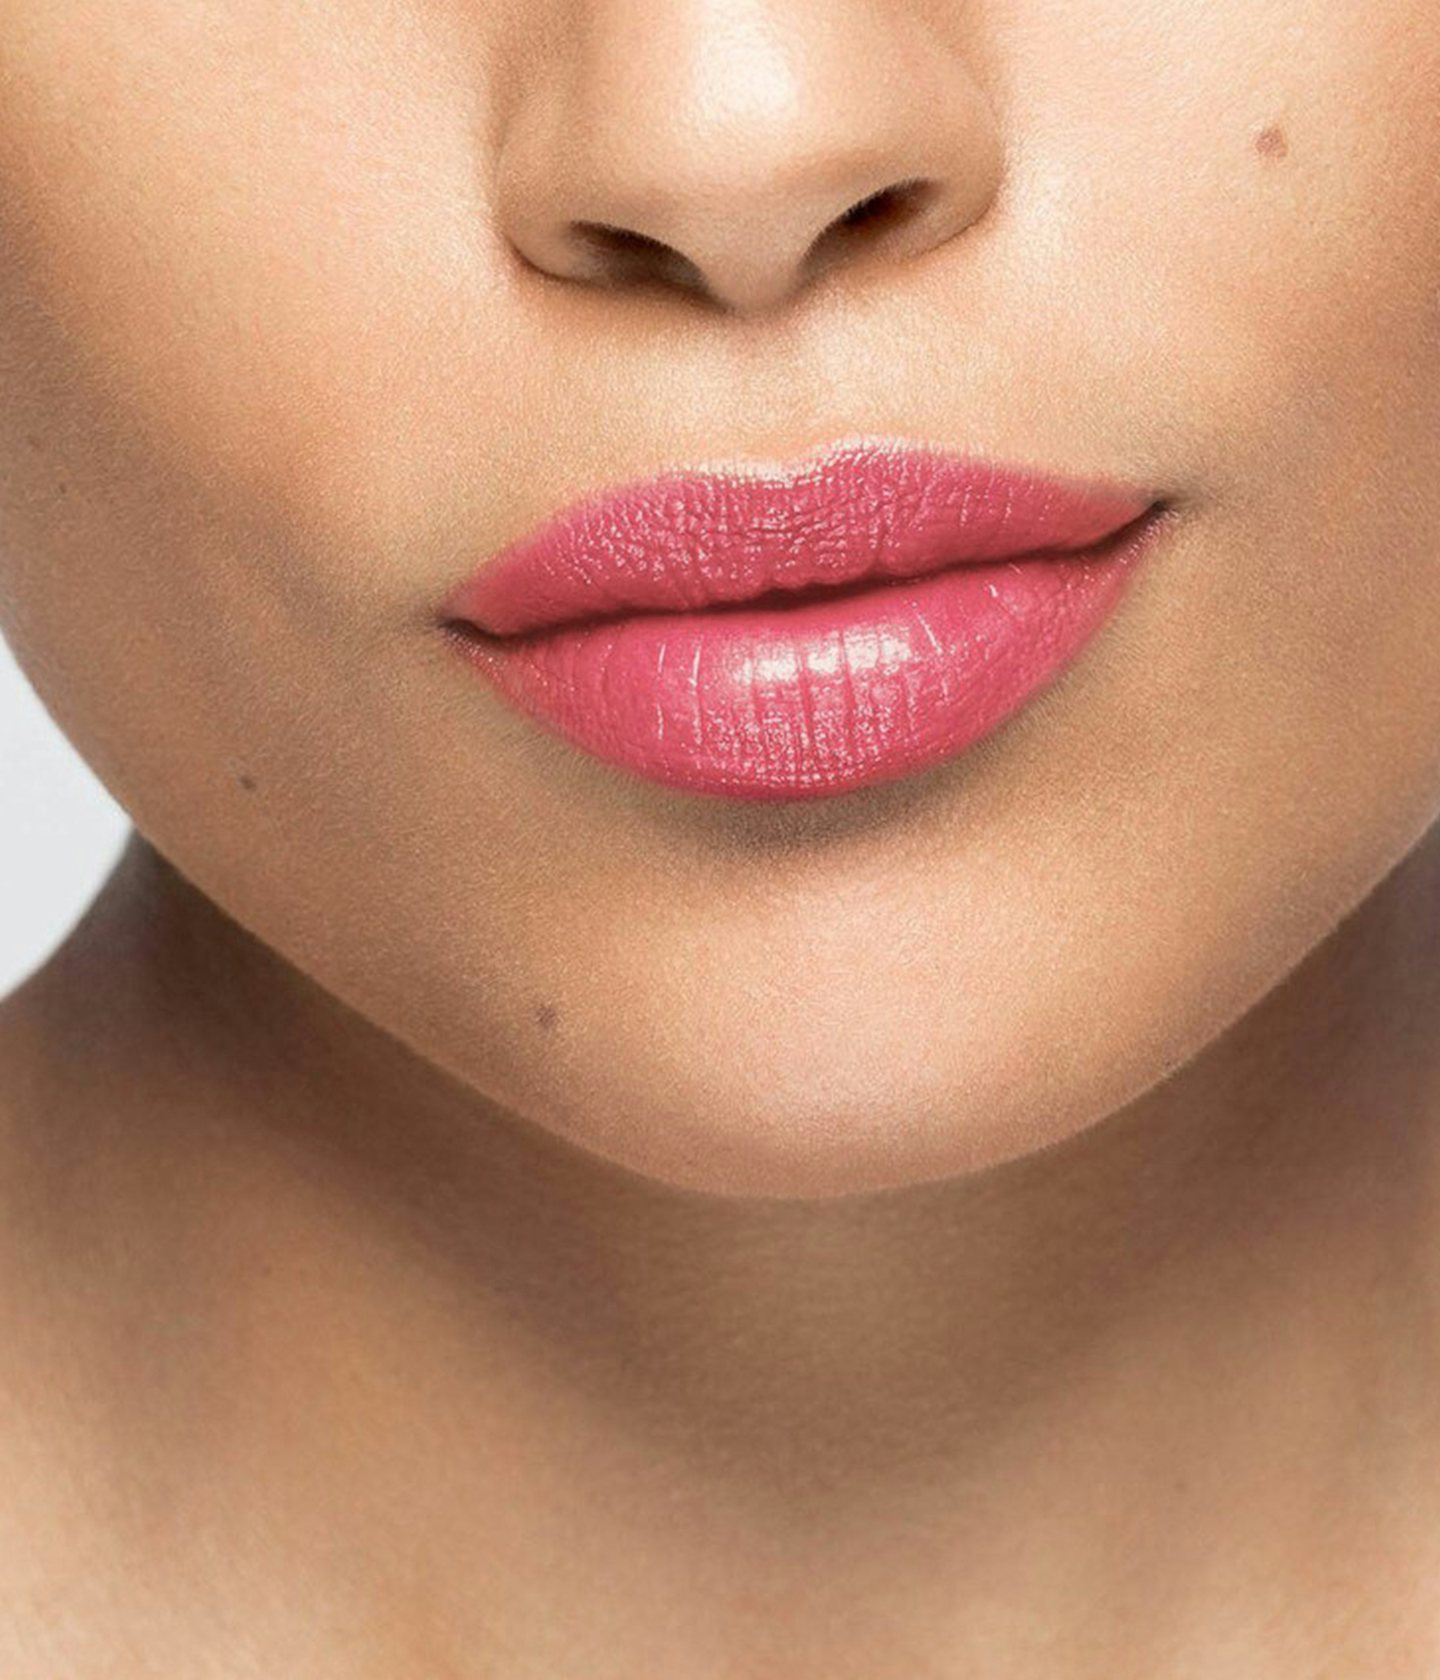 La bouche rouge Dewy Pink lipstick shade on the lips of a medium skin model